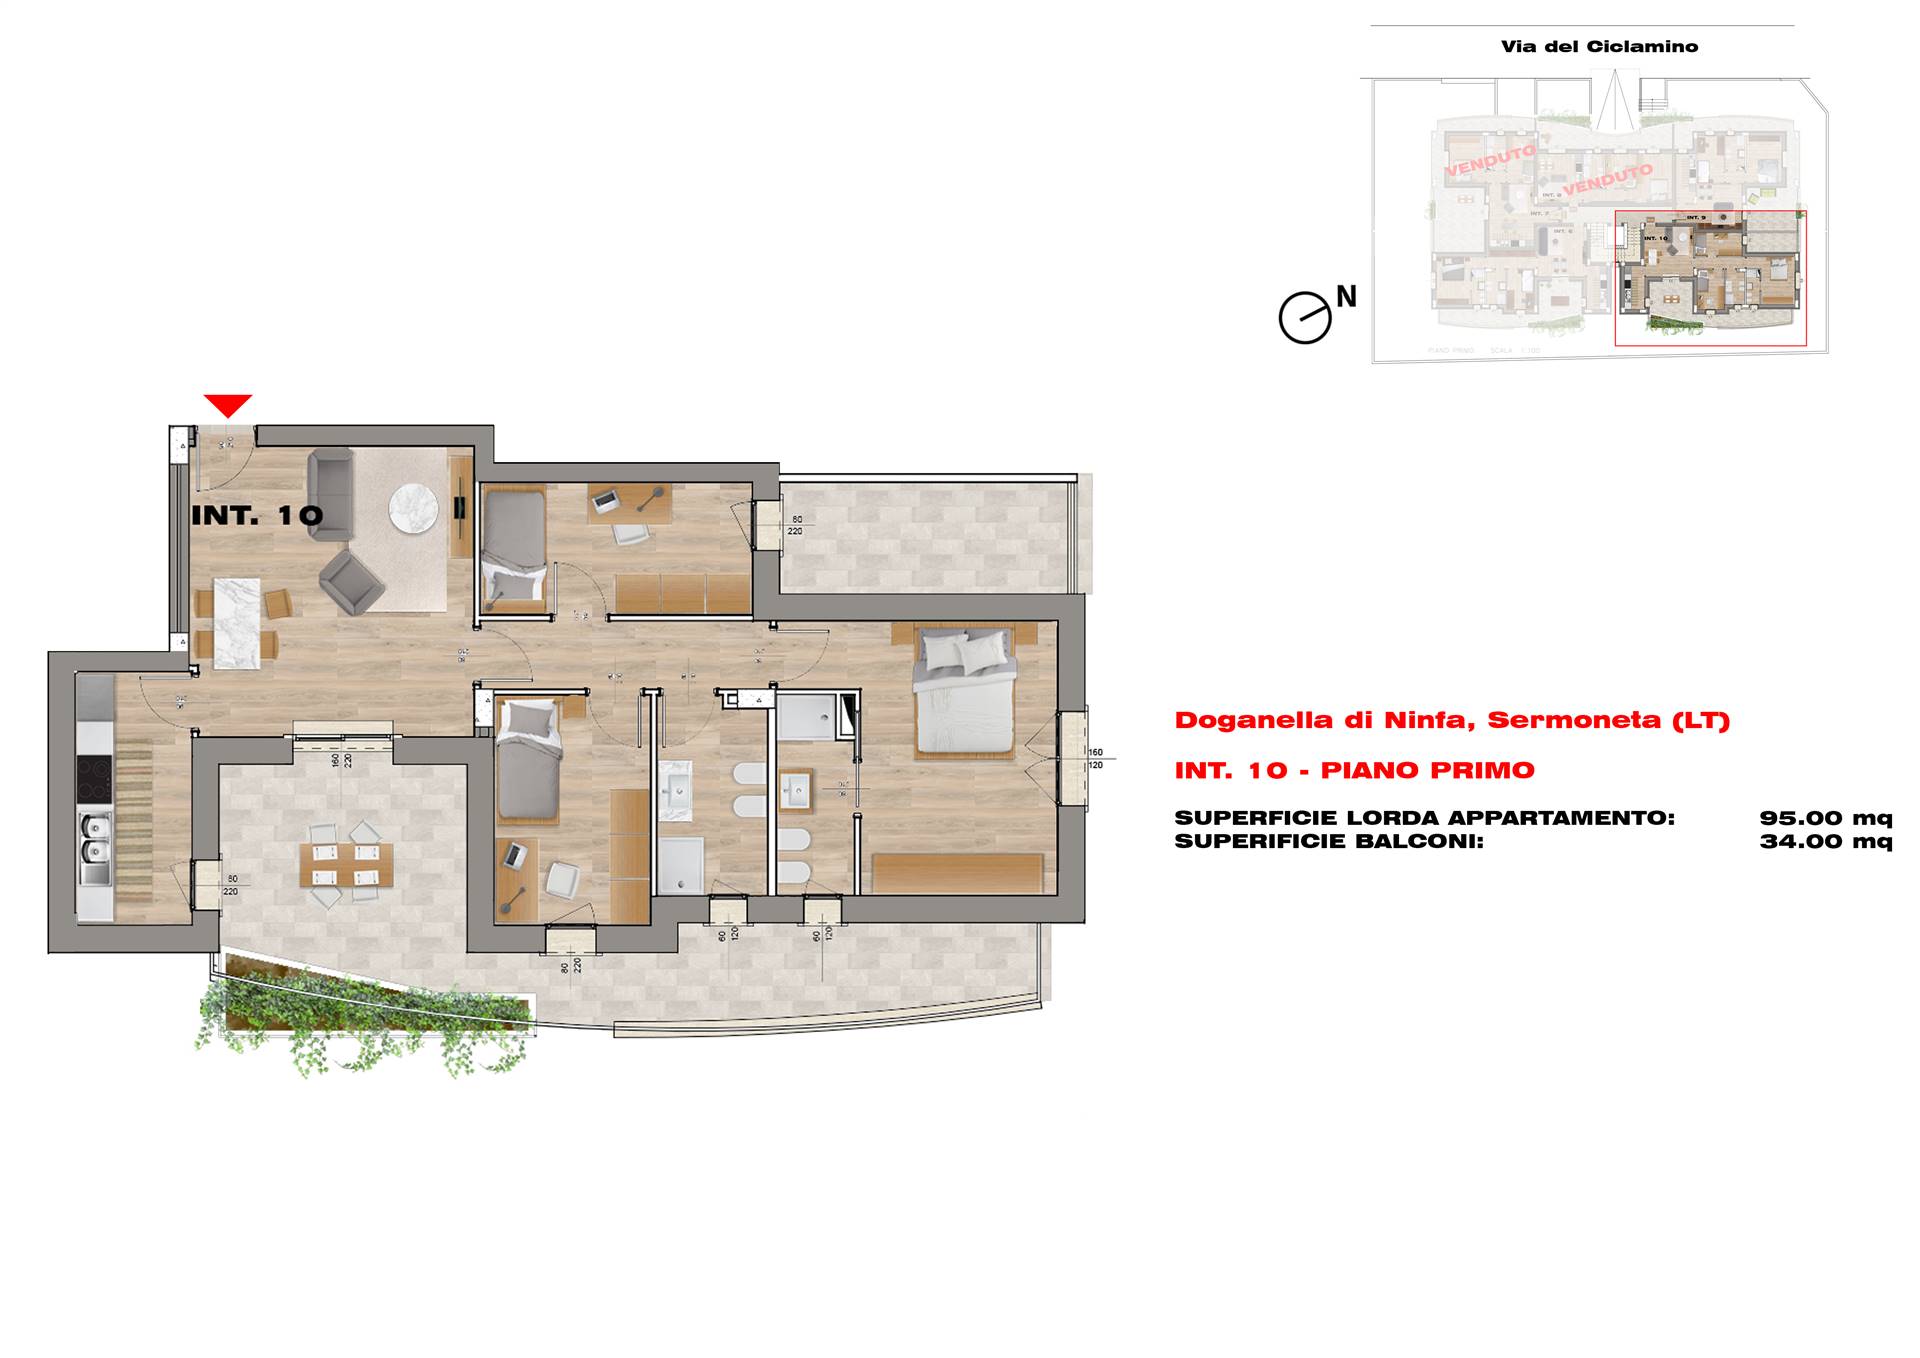 BIVIO DI DOGANELLA, SERMONETA, Apartment for sale of 95 Sq. mt., New construction, Heating Centralized, Energetic class: G, placed at 1° on 3, 